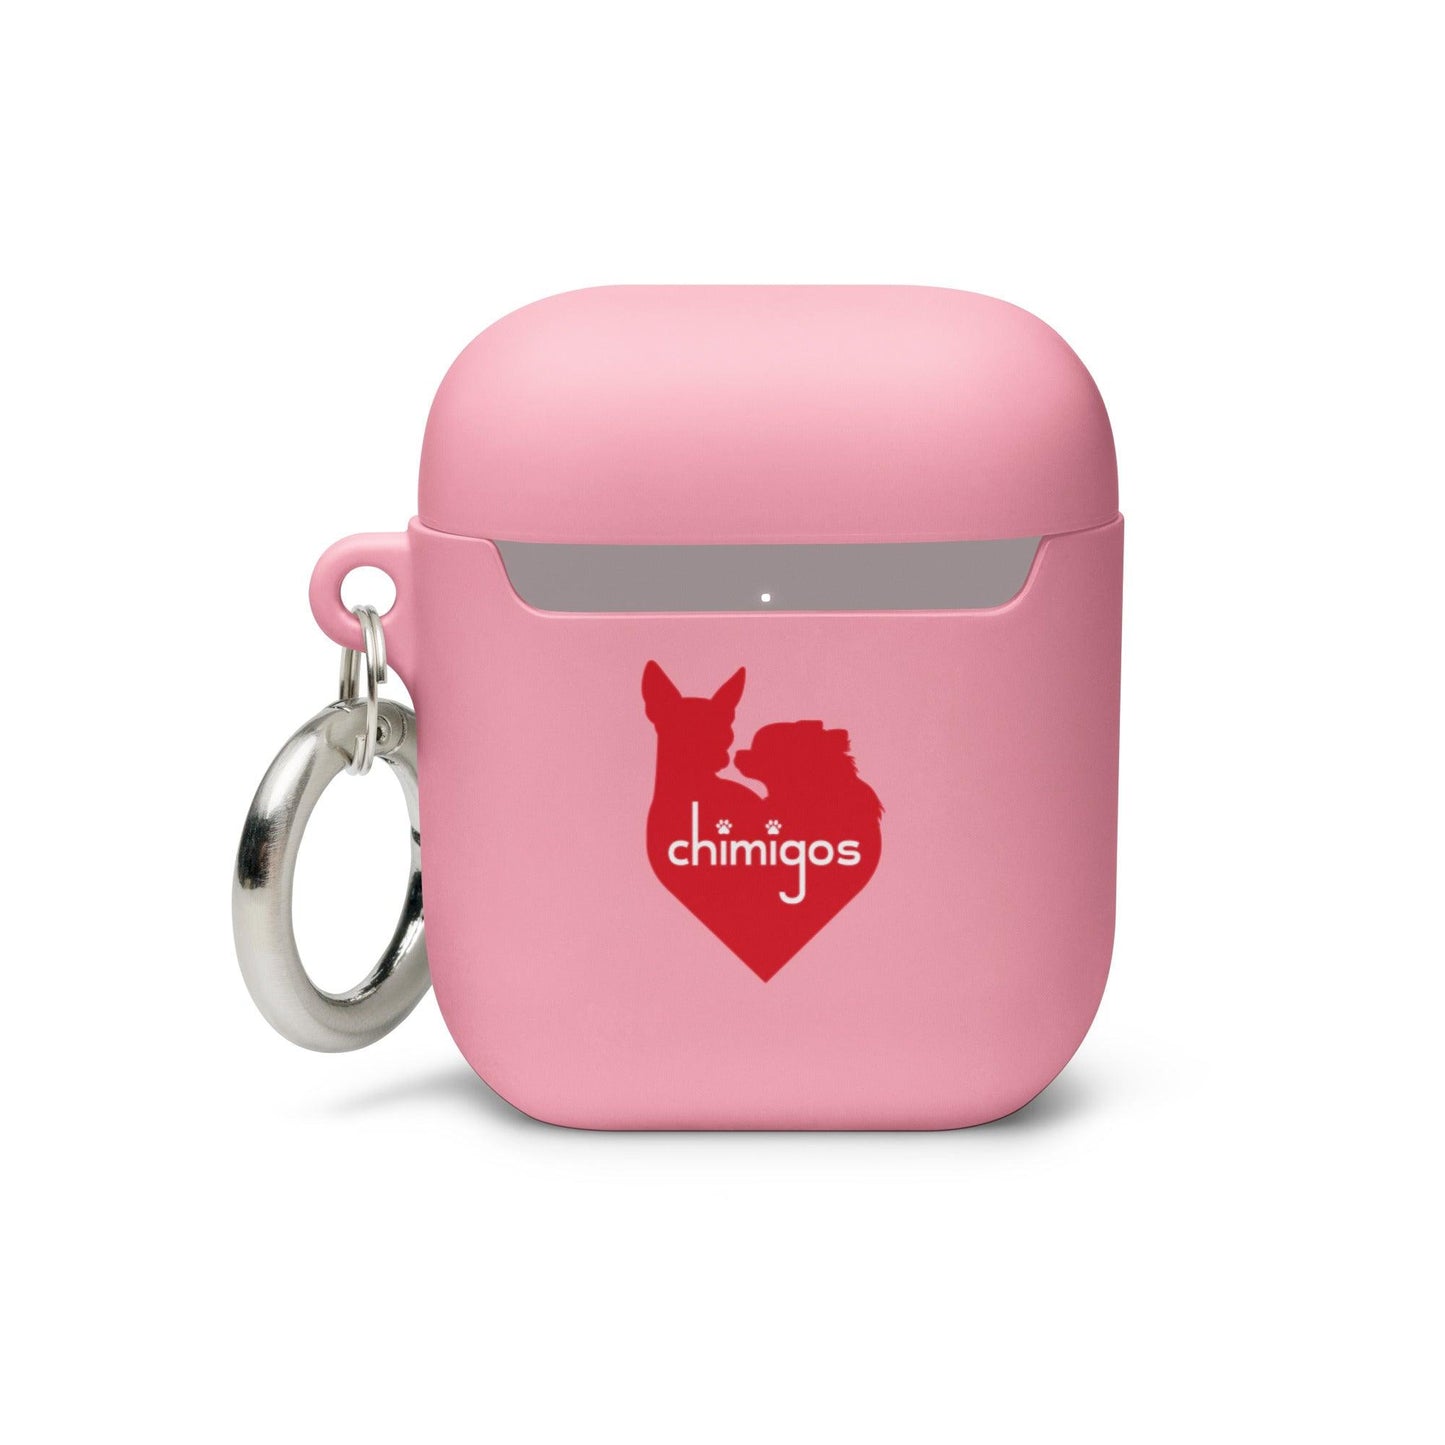 This adorable AirPods® / AirPods® Pro case features a black and white longhaired chihuahua surrounded by a heart-shaped rose garland, and the words "doting chihuahua mummy" - the perfect Mother's Day / birthday / Christmas gift for a chihuahua mum. "Aw" guaranteed! Robust rubber case made from impact-absorbing TPU to protect your earbuds. Works with both wireless and regular AirPod chargers. Includes round metal carabiner to attach to your bag, etc. Pink or White. Design by Renate Kriegler for Chimigos.